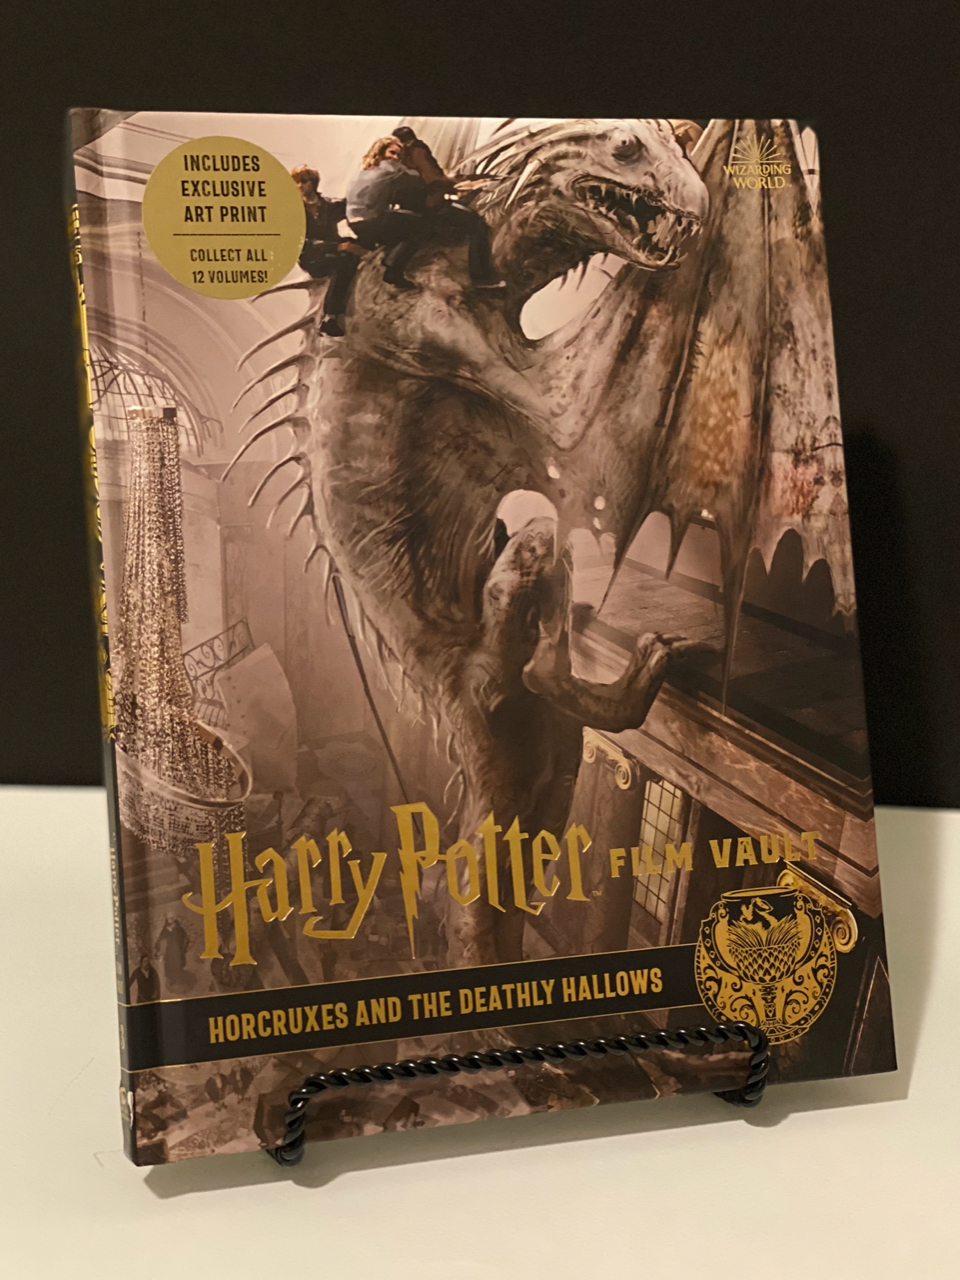  Harry Potter Film Vault: Horcruxes and the Deathly Hallows  (Wizarding World Book 3) eBook : Insight Editions: Kindle Store